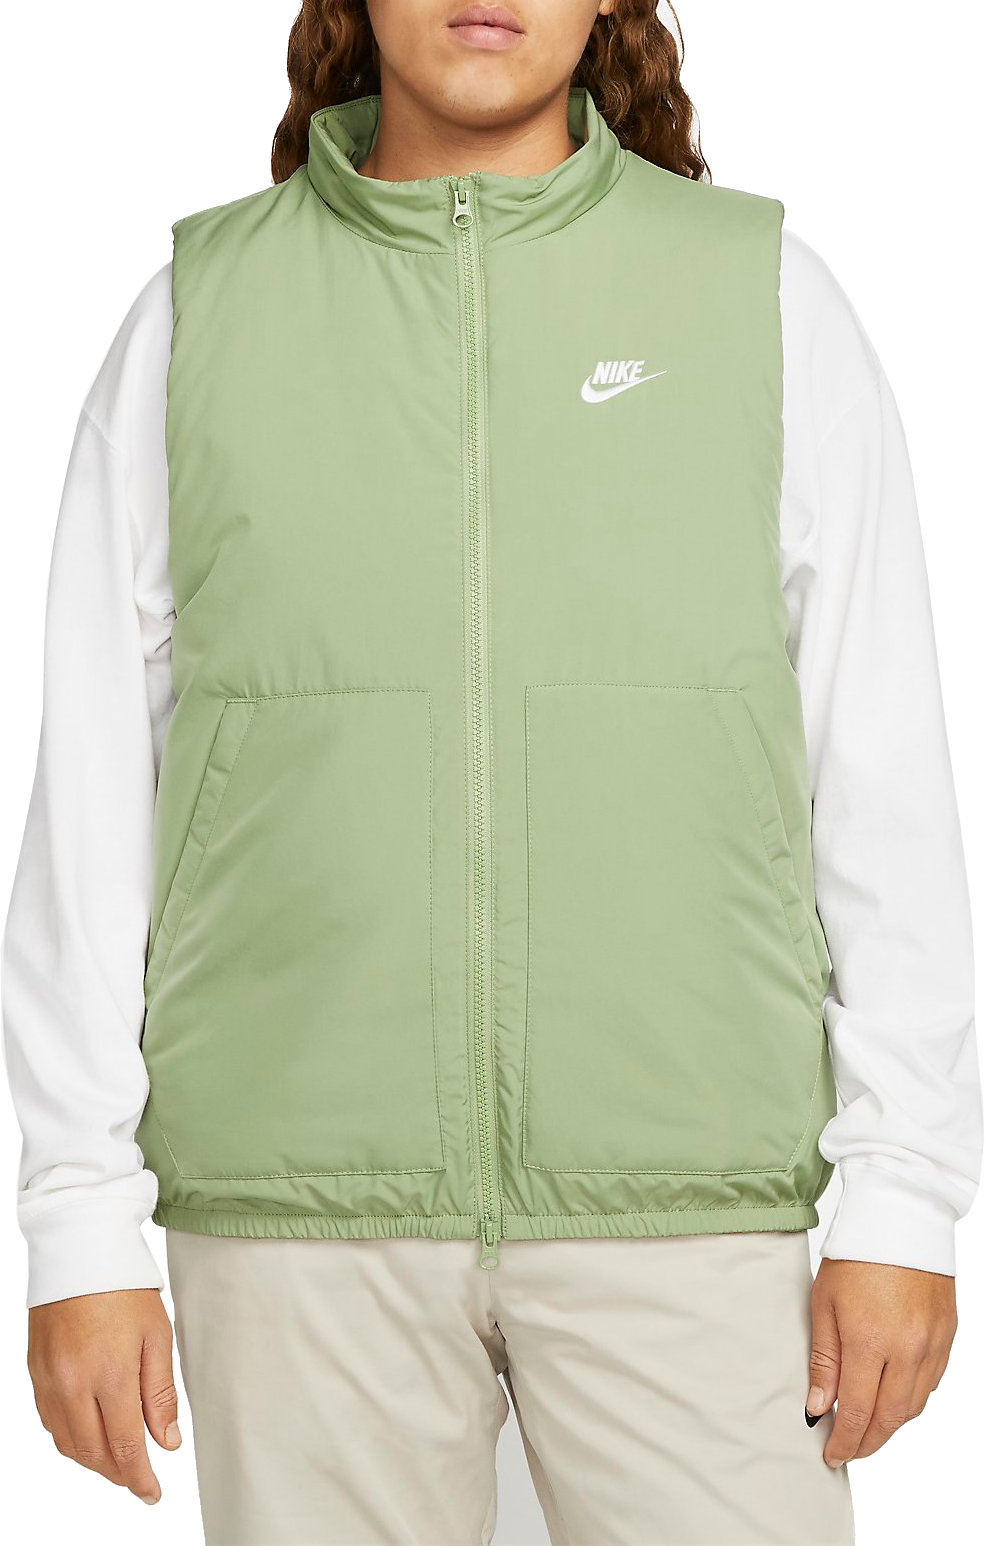 Weste Nike Therma-FIT Club - Men's Woven Insulated Gilet